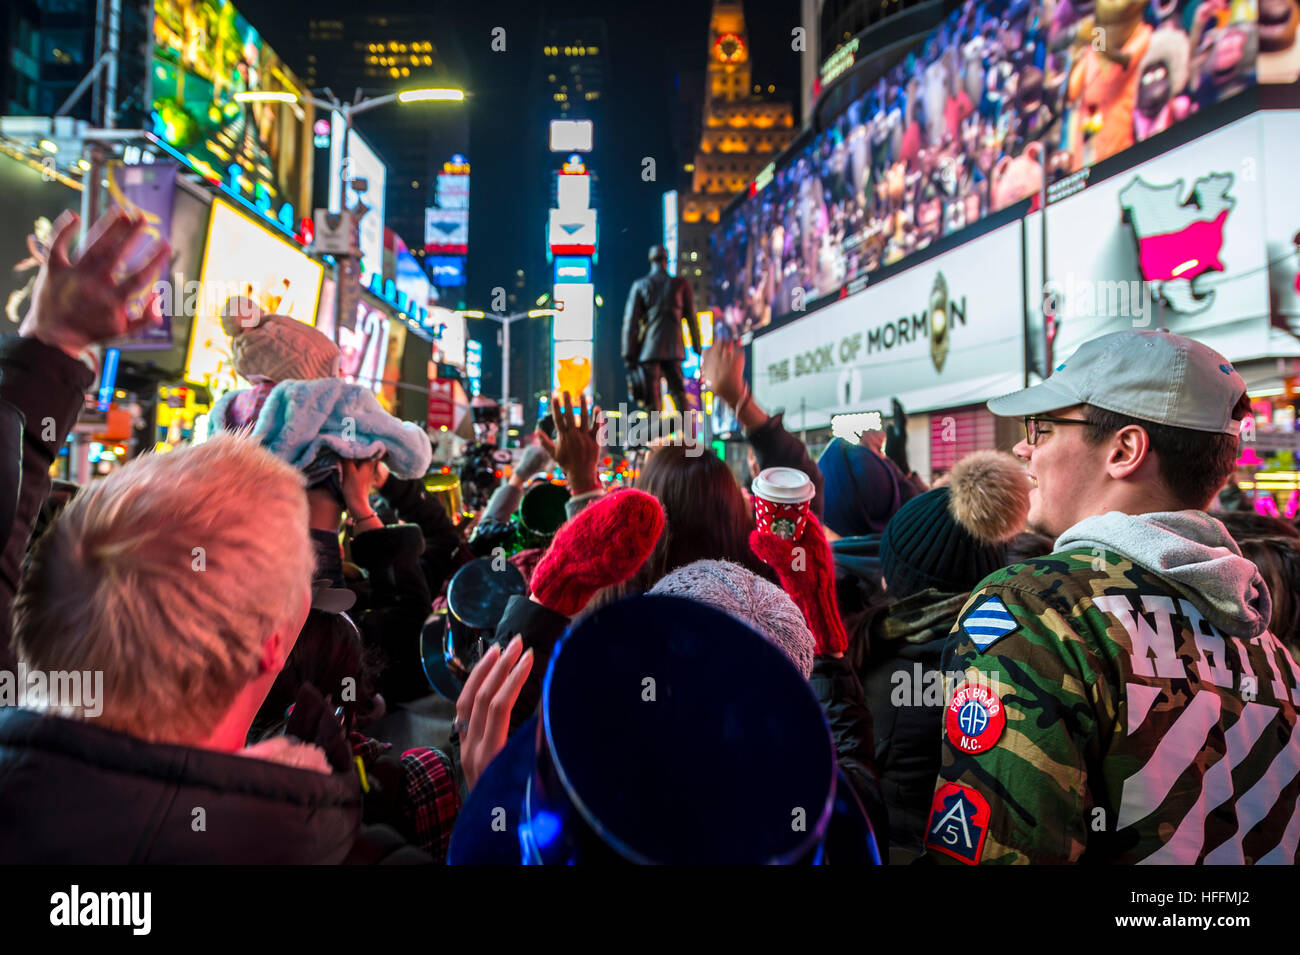 NEW YORK CITY - DECEMBER 23, 2016: Traffic and crowd fill Times Square as the city prepares for New Year's Eve. Stock Photo